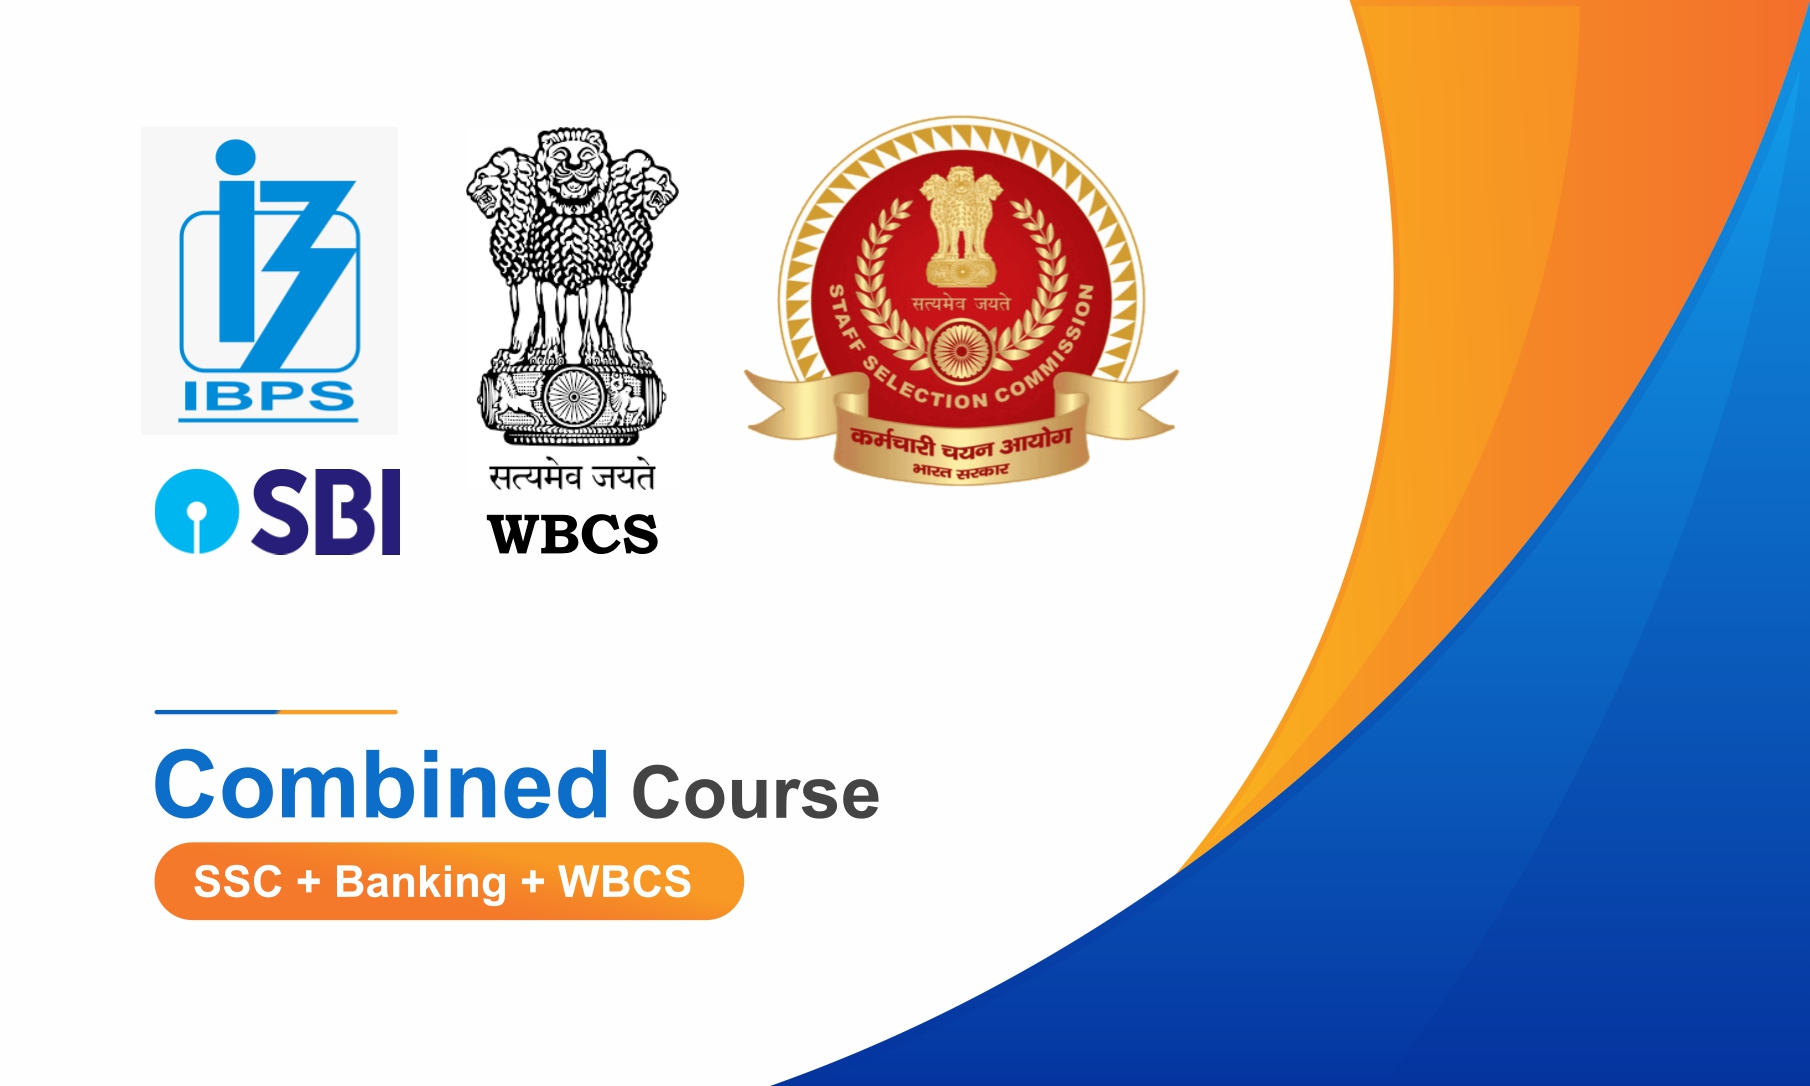 An imge showing the combined course of SSC, Banking and WBCS offered by Excellent Tutorial